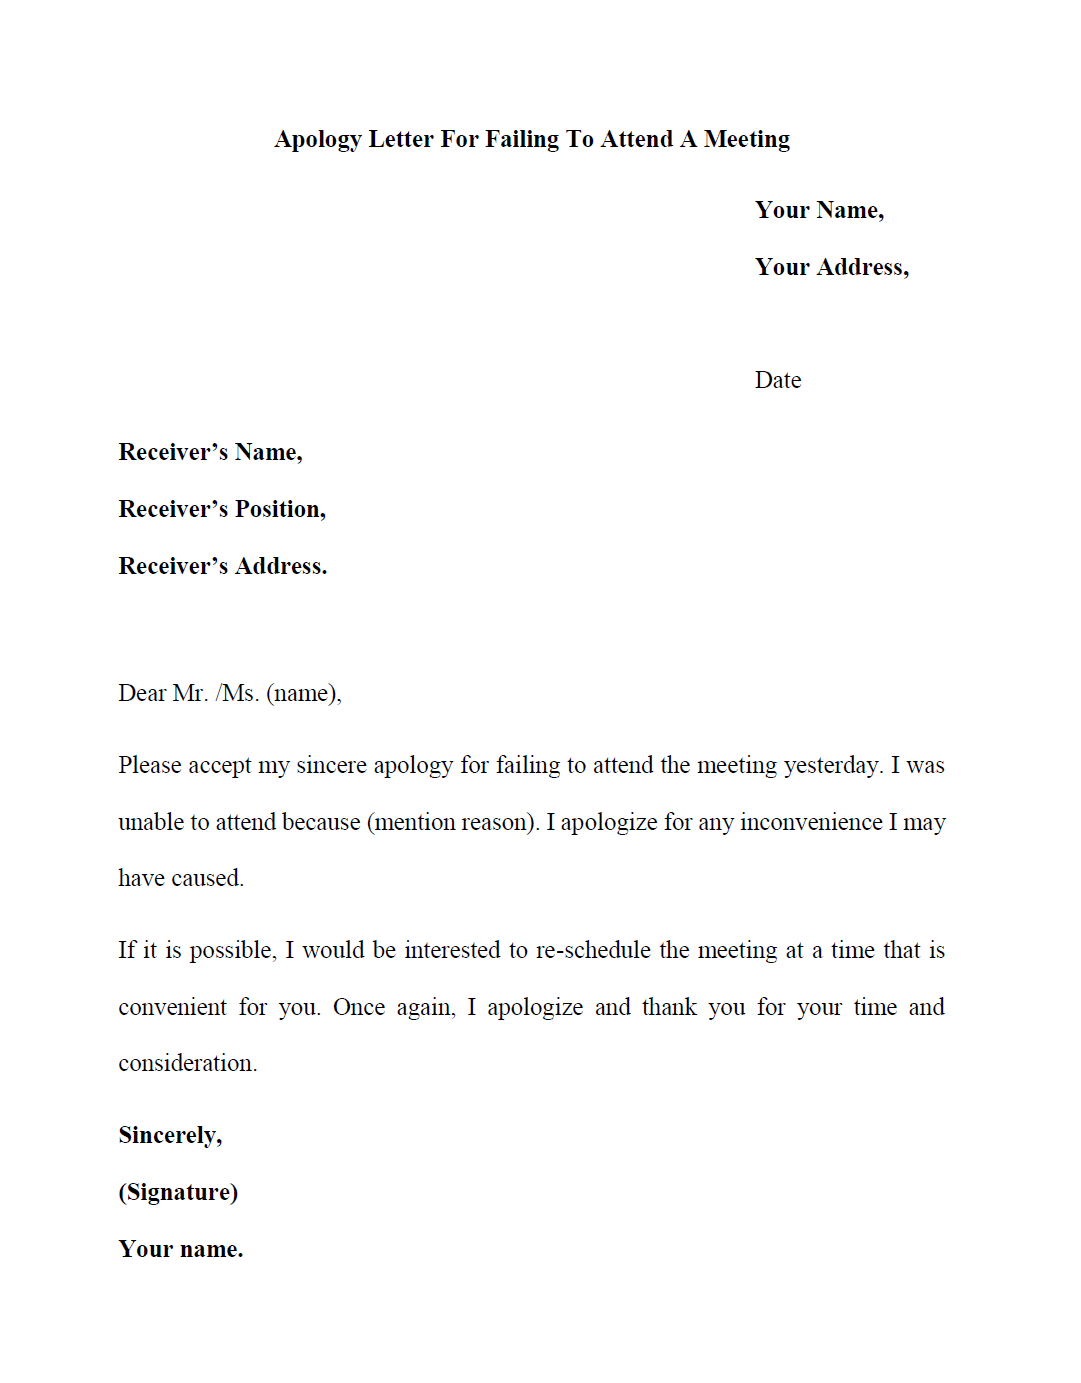 Apology Letter Sample: Apology Letter For Failing To Attend A